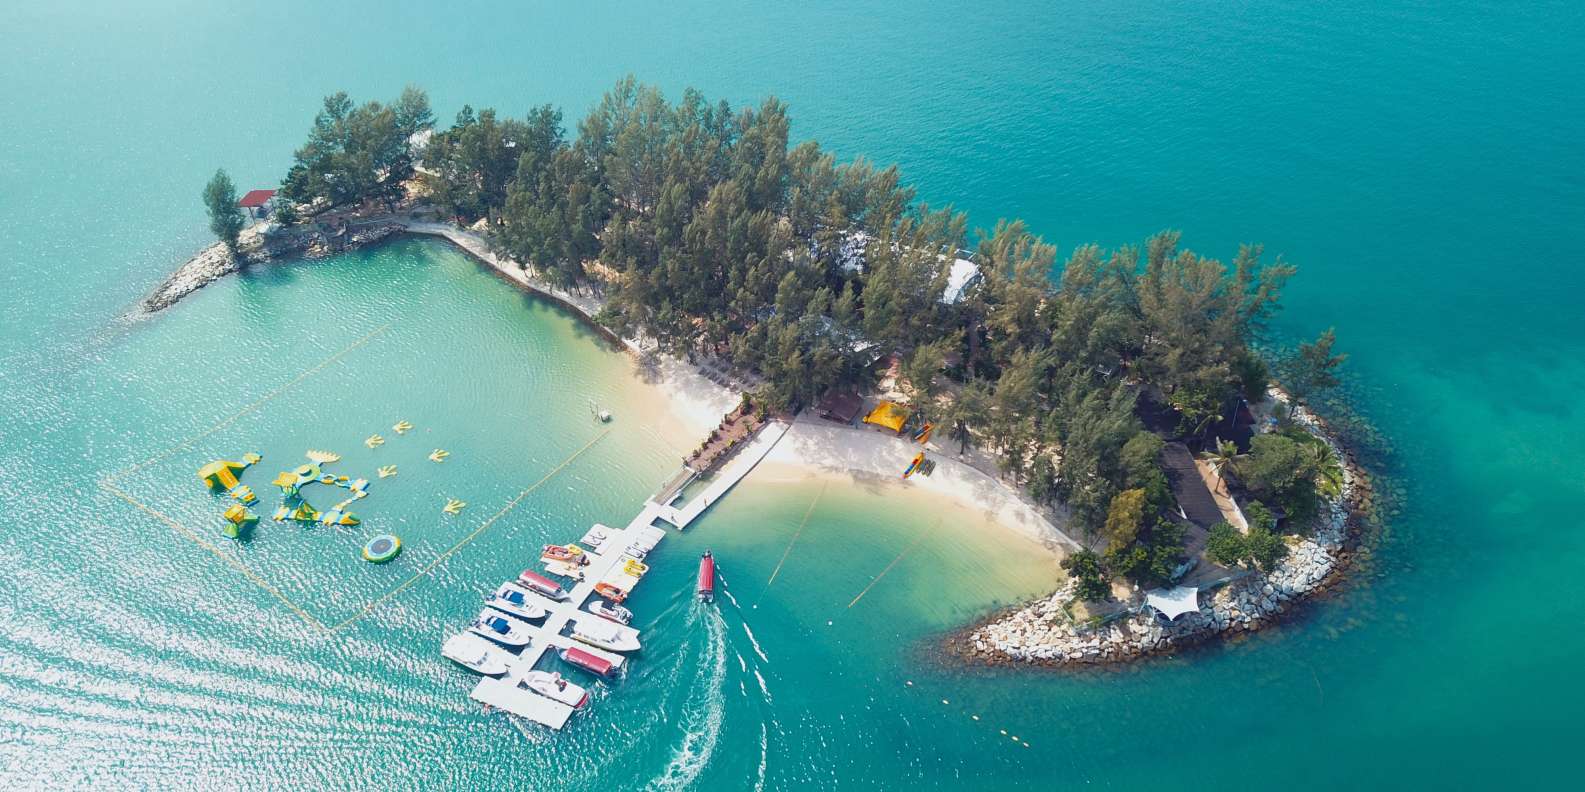 Top ᑕ㉗ᑐ Things To Do In Langkawi ️ And Day Trip Malaysia